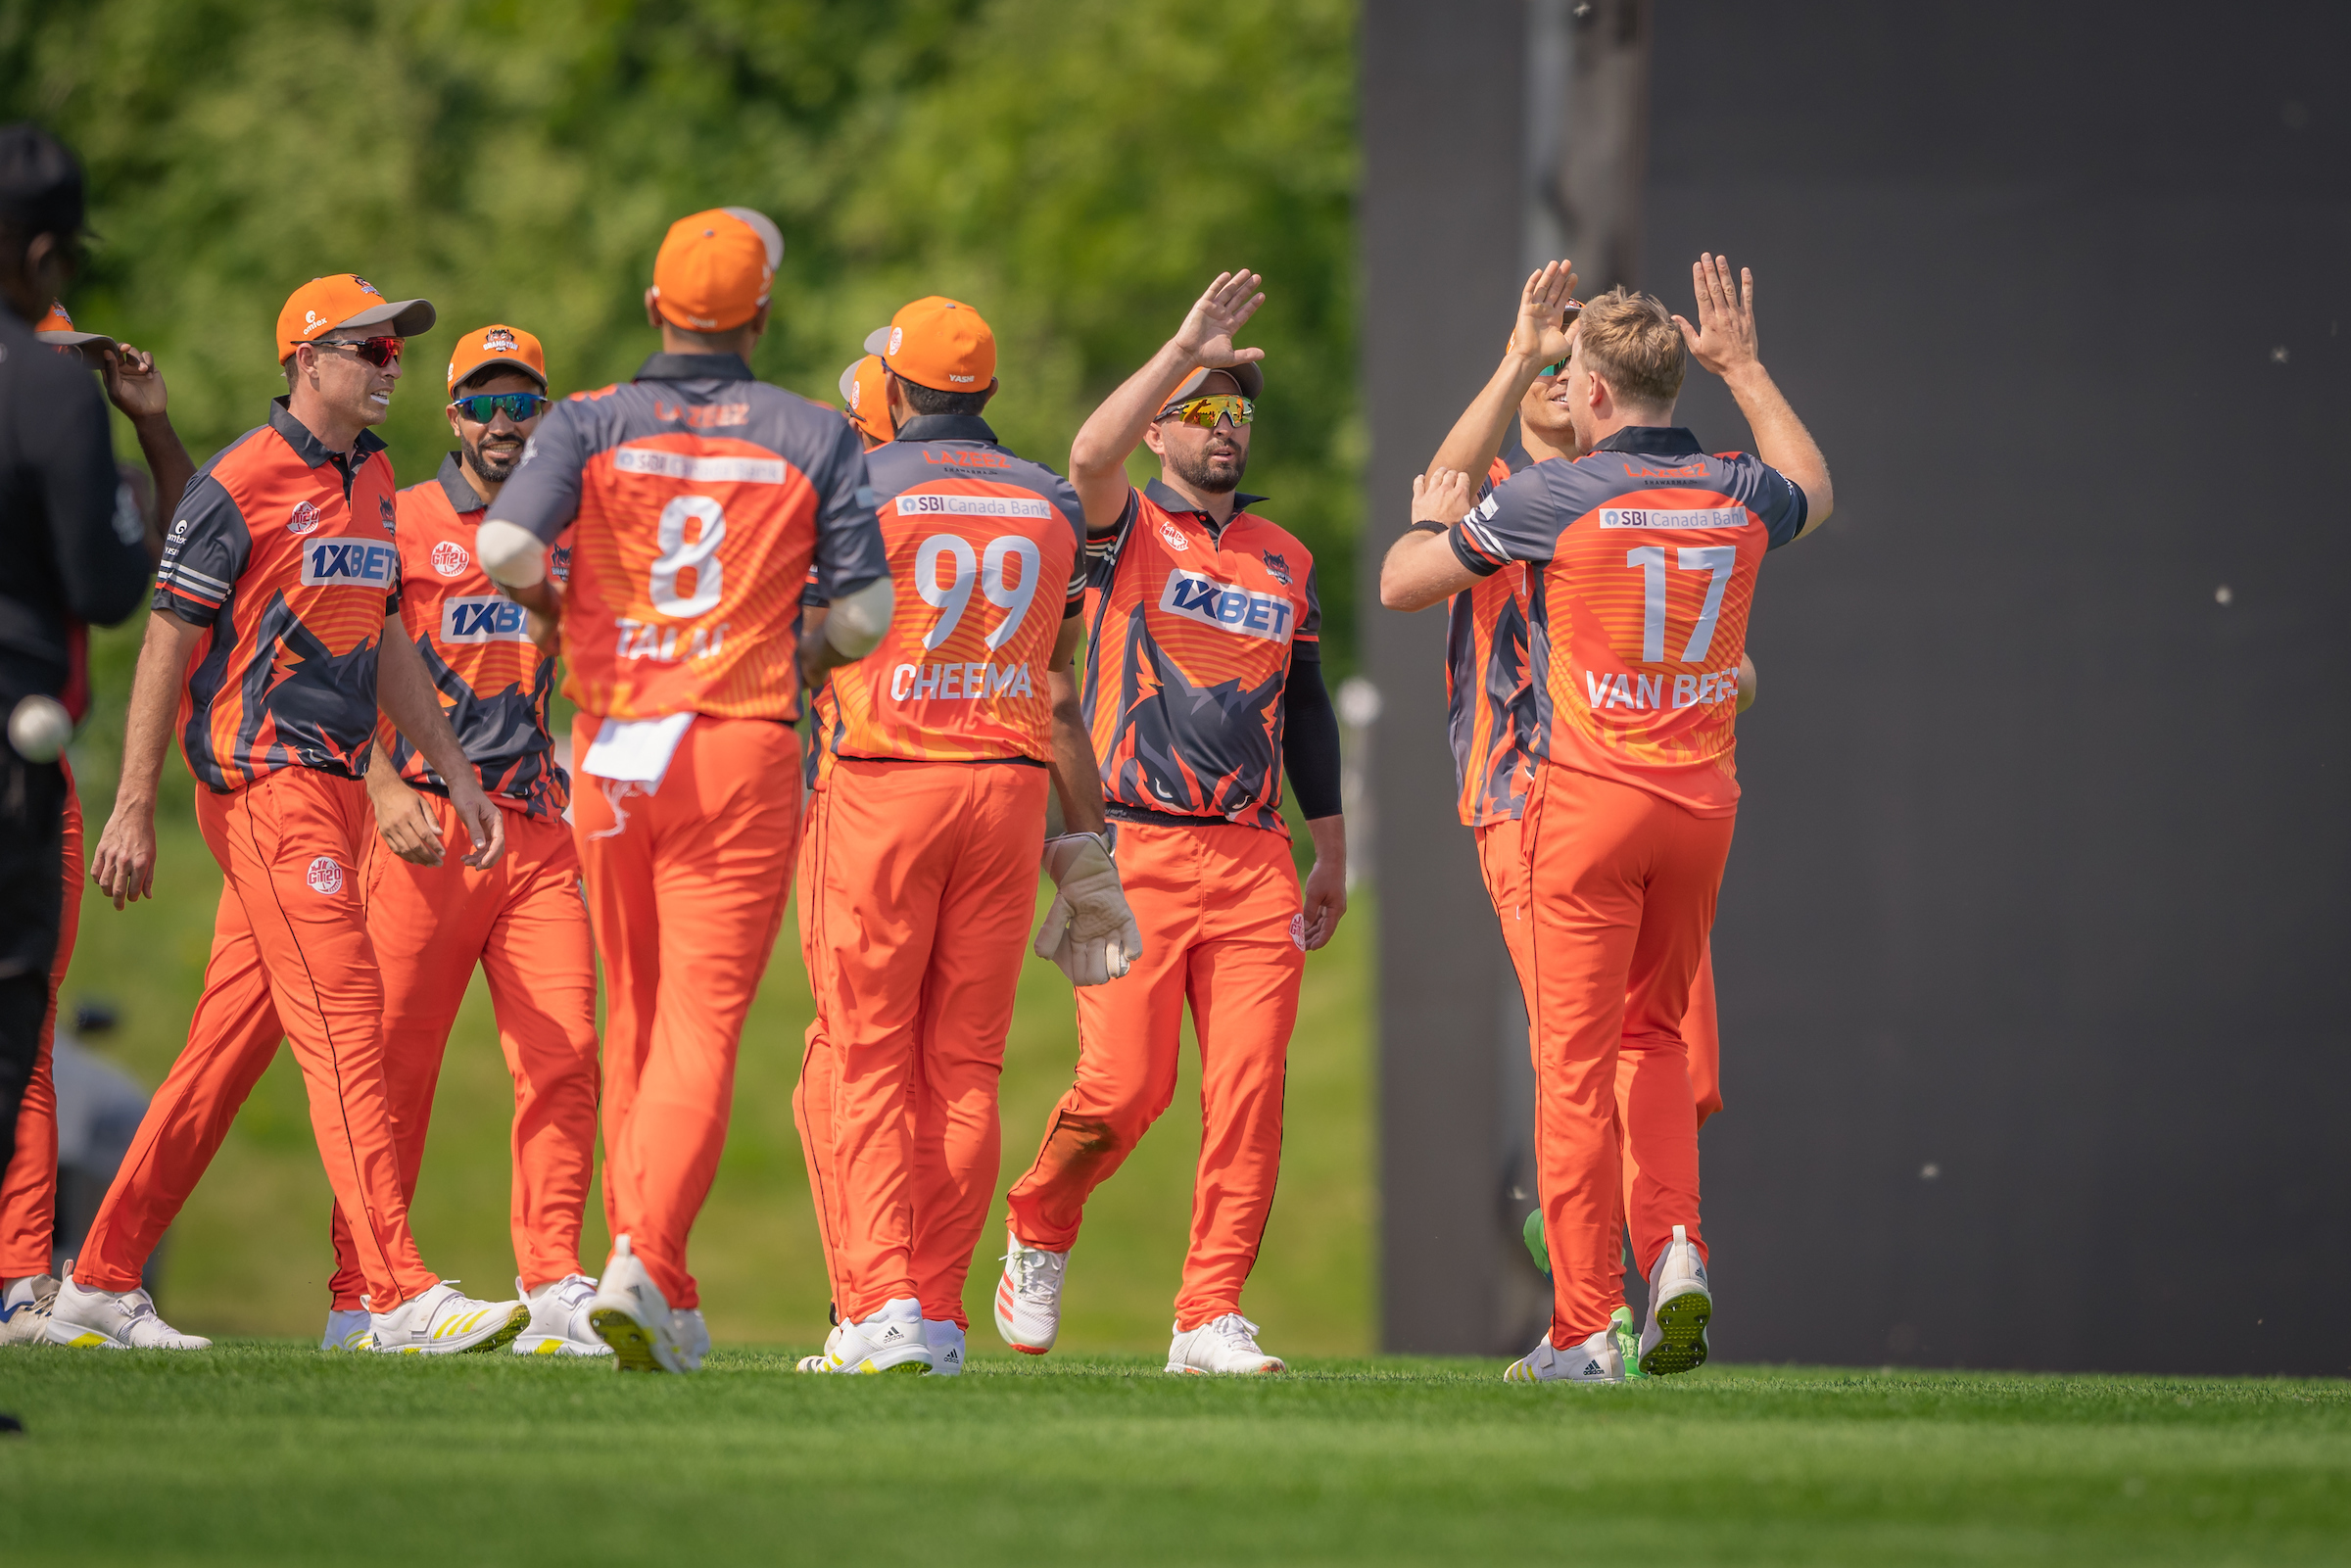 Brampton Wolves reign supreme in season opener of Global T20 Canada, with a victory against Mississauga Panthers